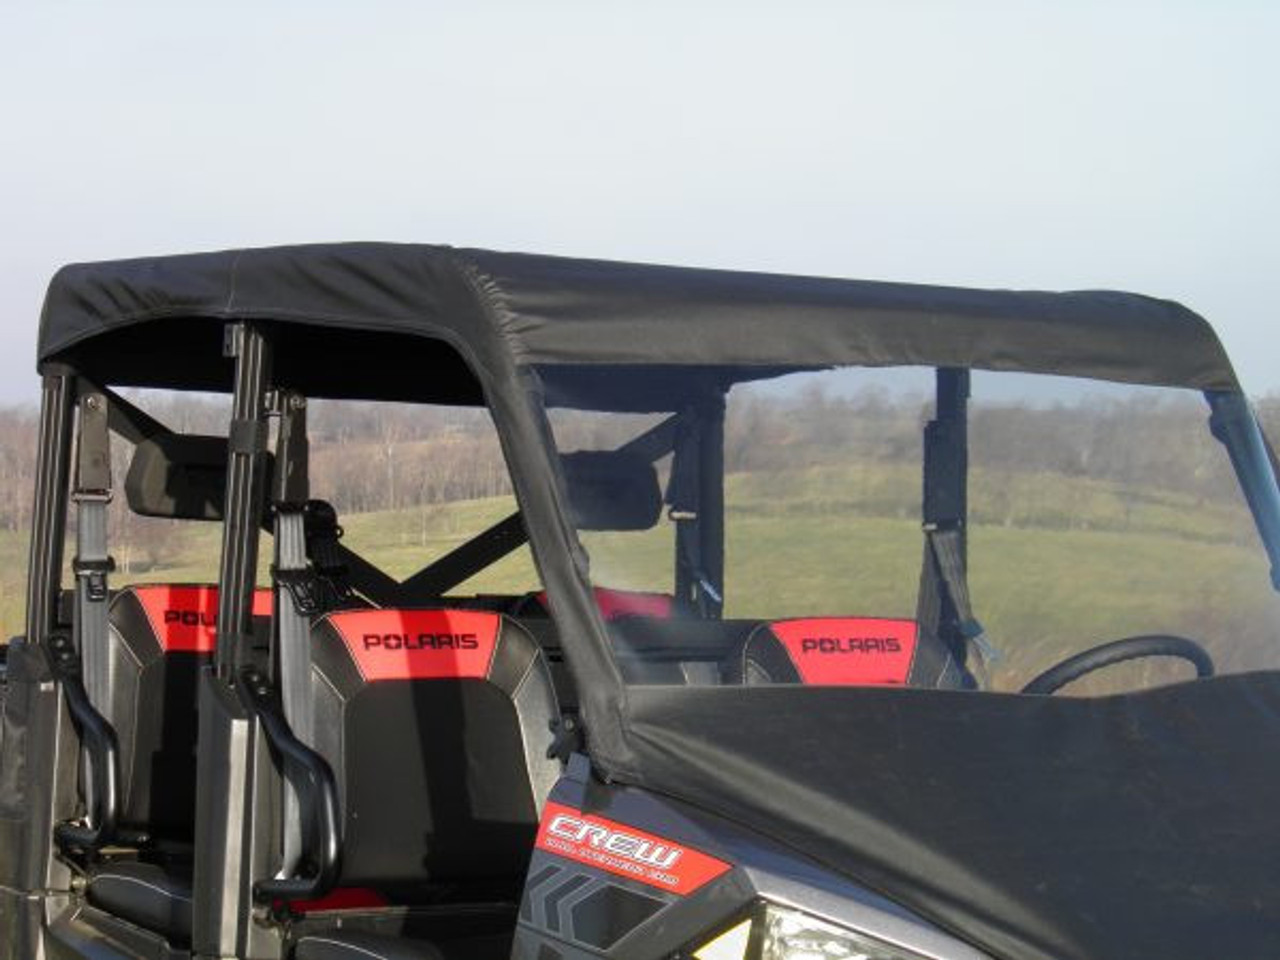 3 Star side x side Polaris Ranger Crew 1000/XP1000 vinyl windshield and top close-up view